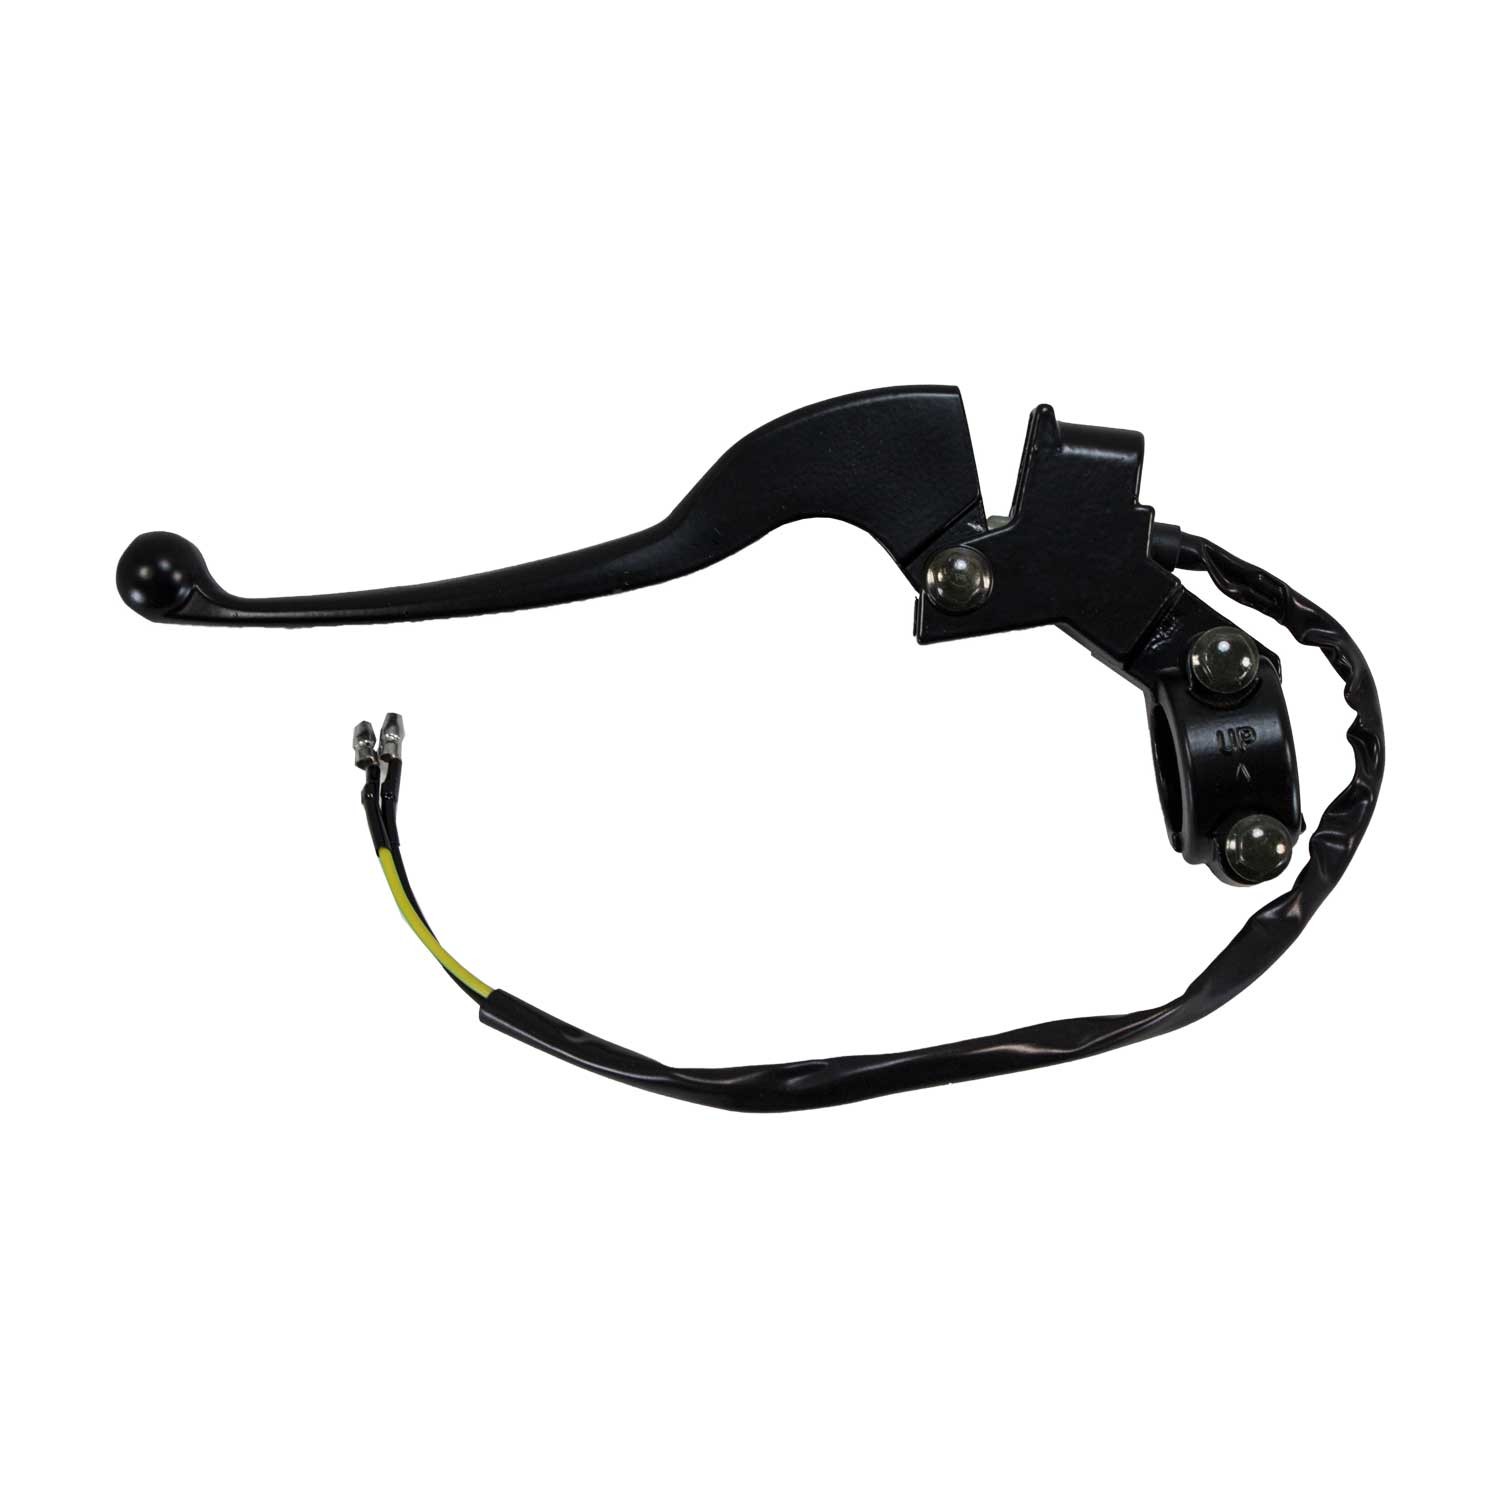 LEFT BRAKE HANDLE ASSEMBLY | QualityScooterParts.com